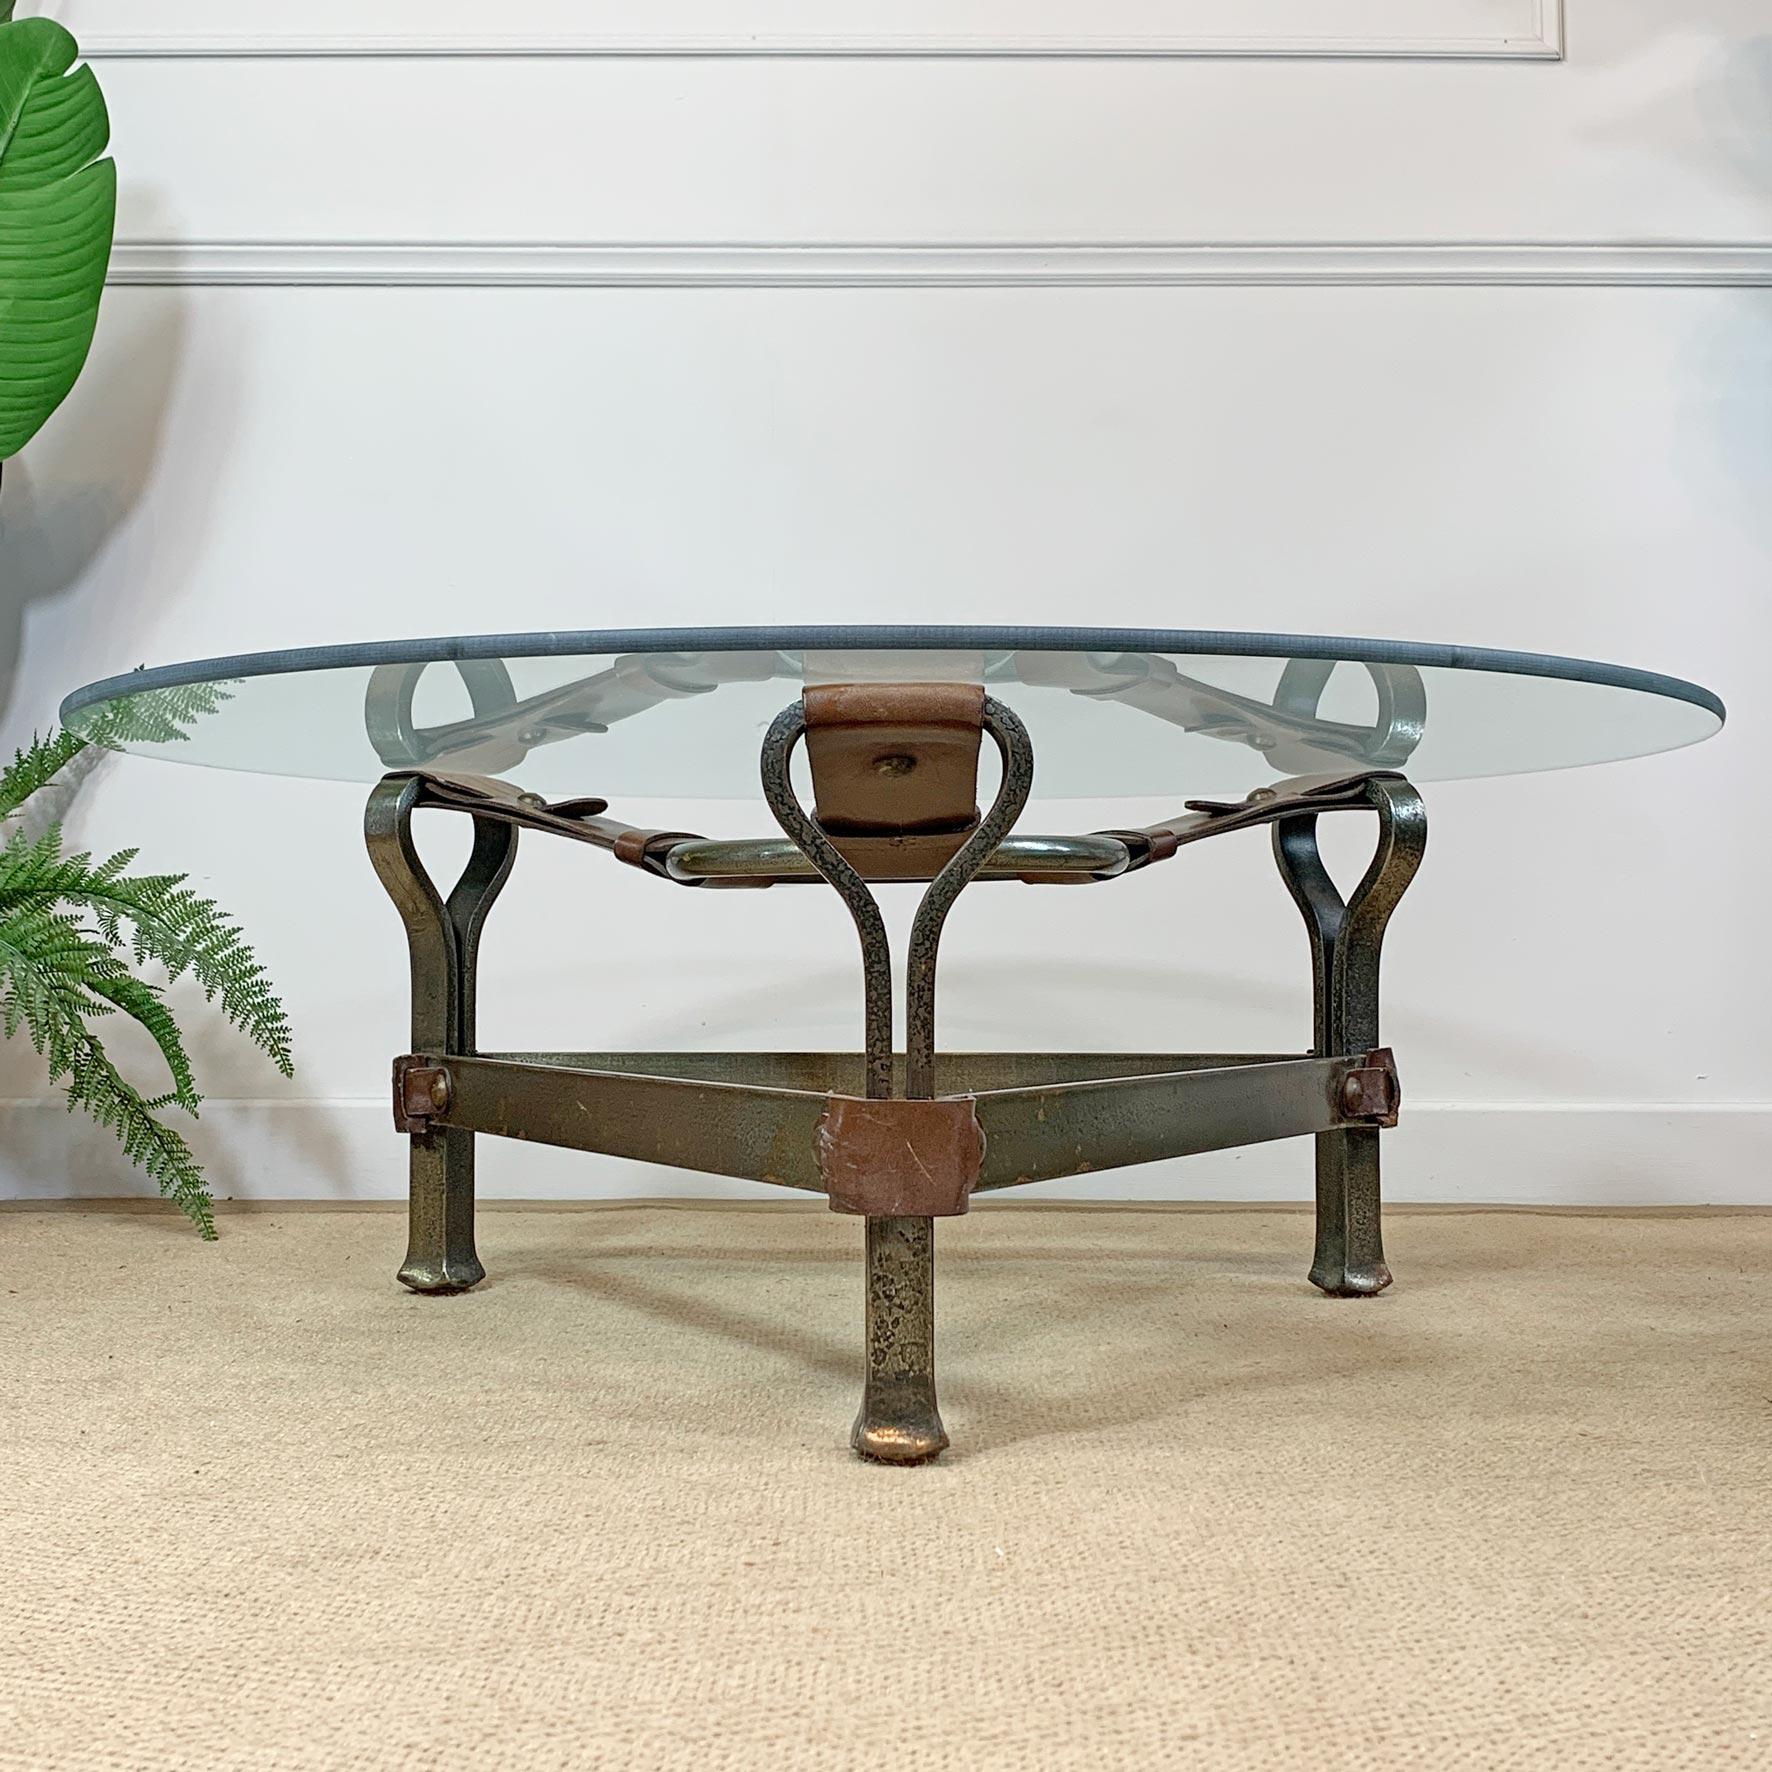 French Jean-Pierre Ryckaert Tan Leather Strap and Steel Coffee Table For Sale